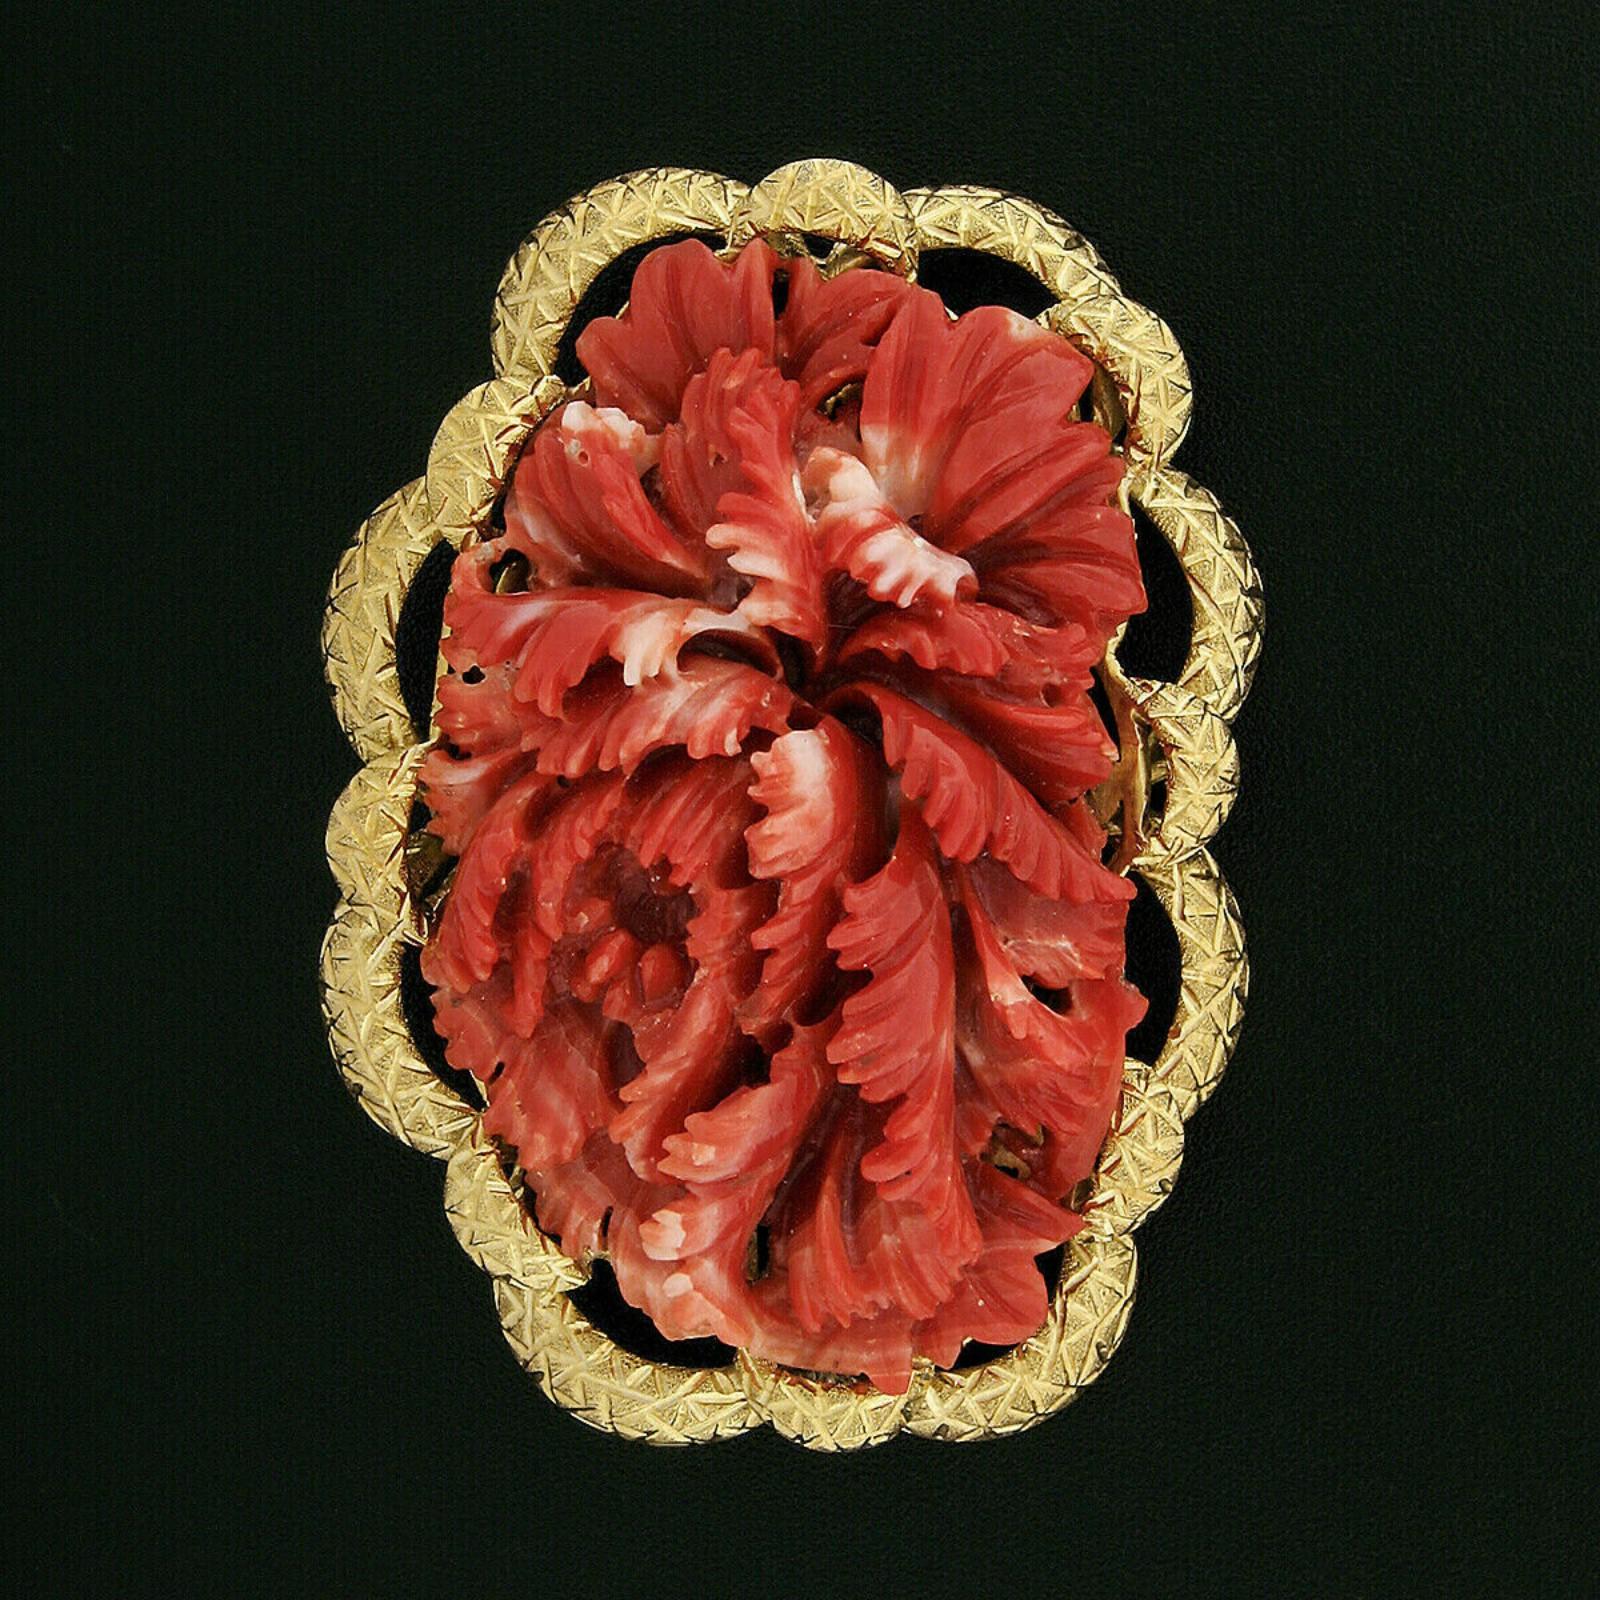 This large, unique, and very well-made vintage brooch was crafted from solid 18k yellow gold. It features a GIA certified natural coral set into a beautiful hand-engraved and textured frame. The coral is a rich orange-red color and is masterfully